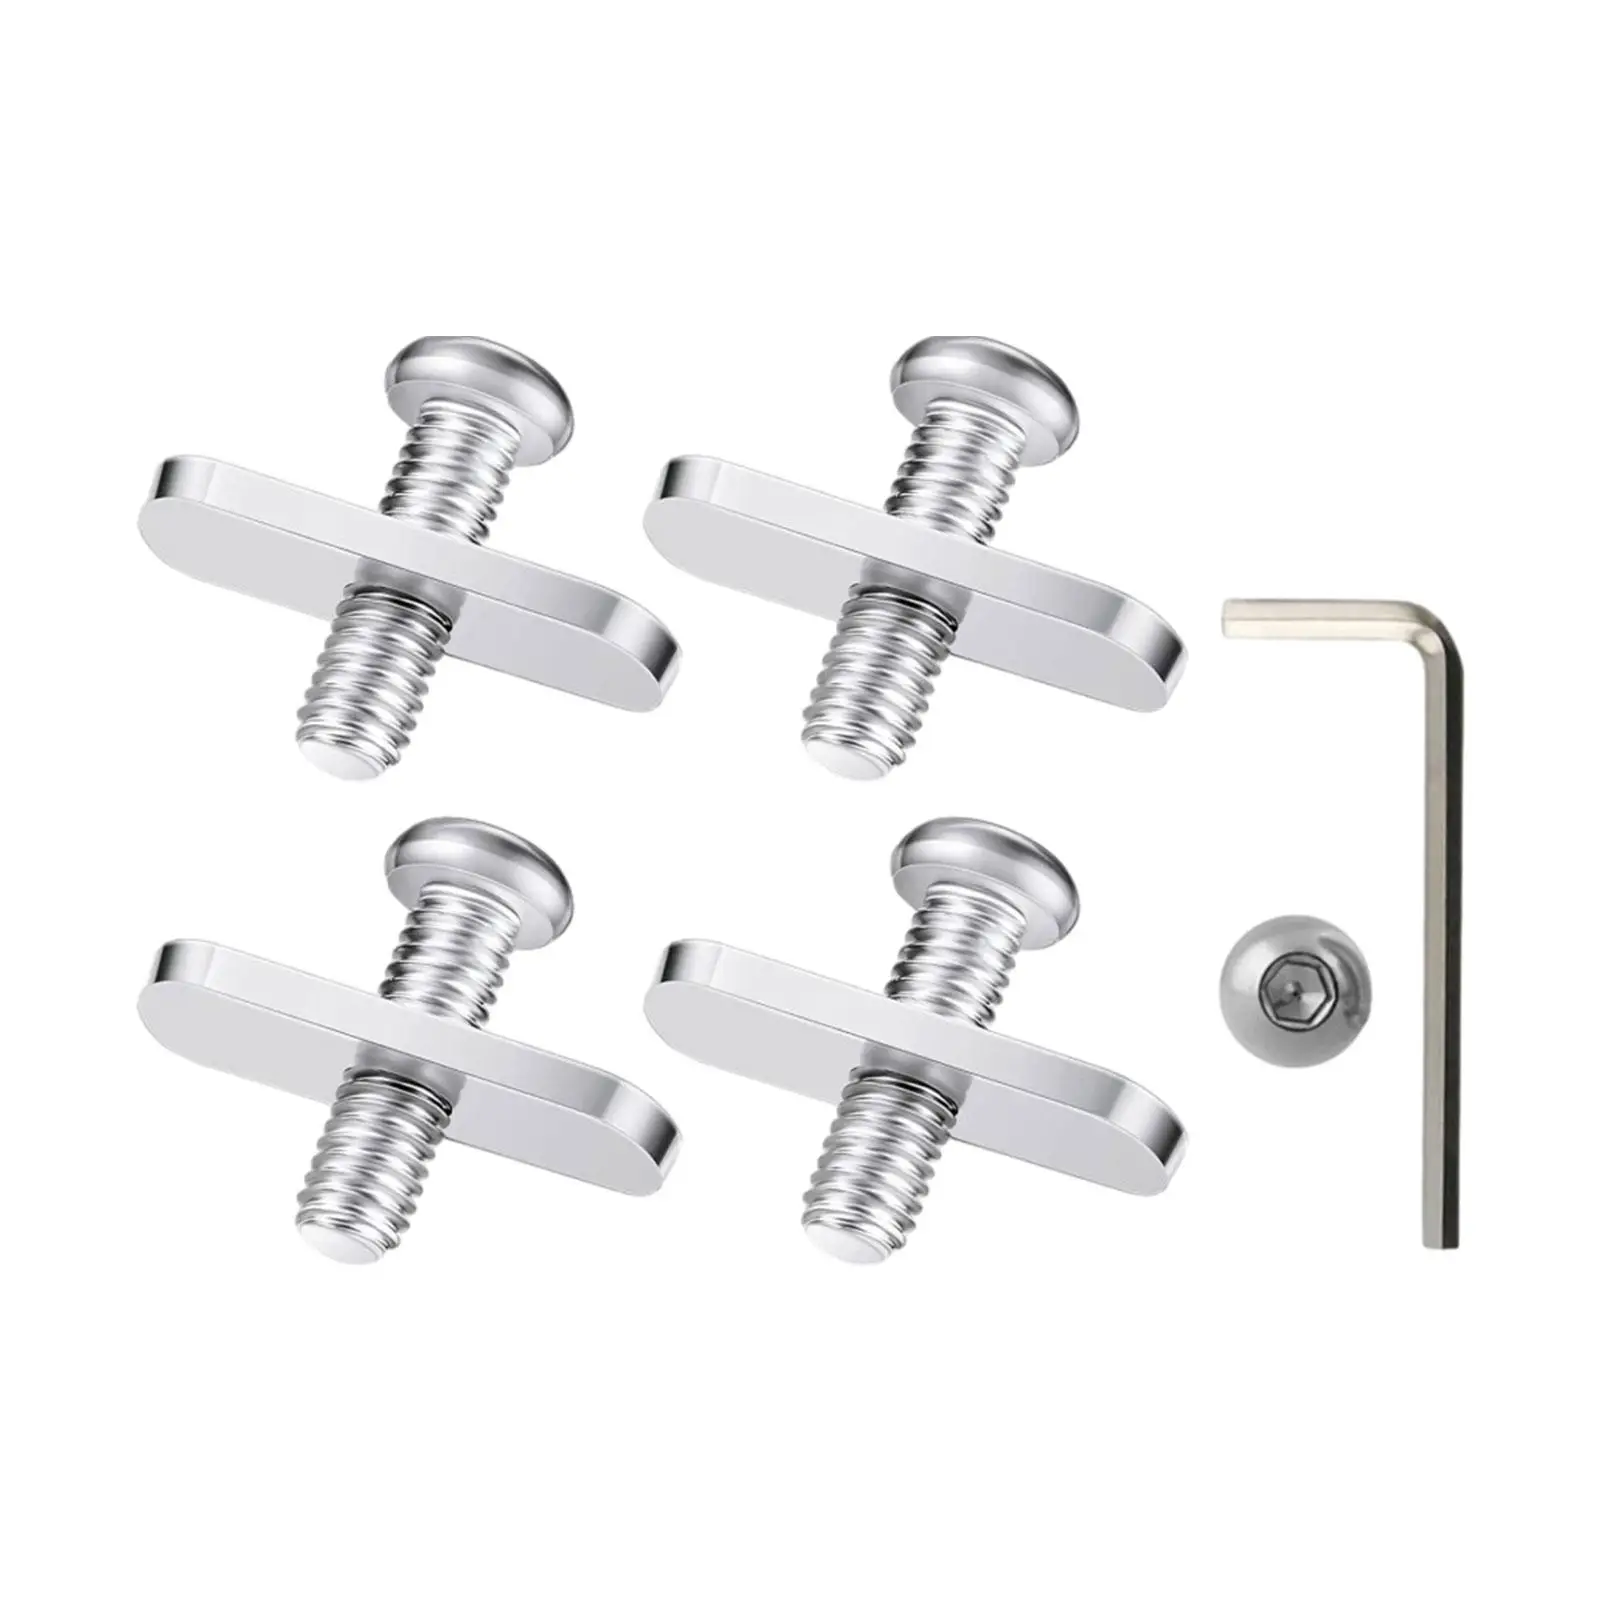 4 Pack Kayak Rail Track Screws Track Nuts Mounting Hardware Gear Spare Parts